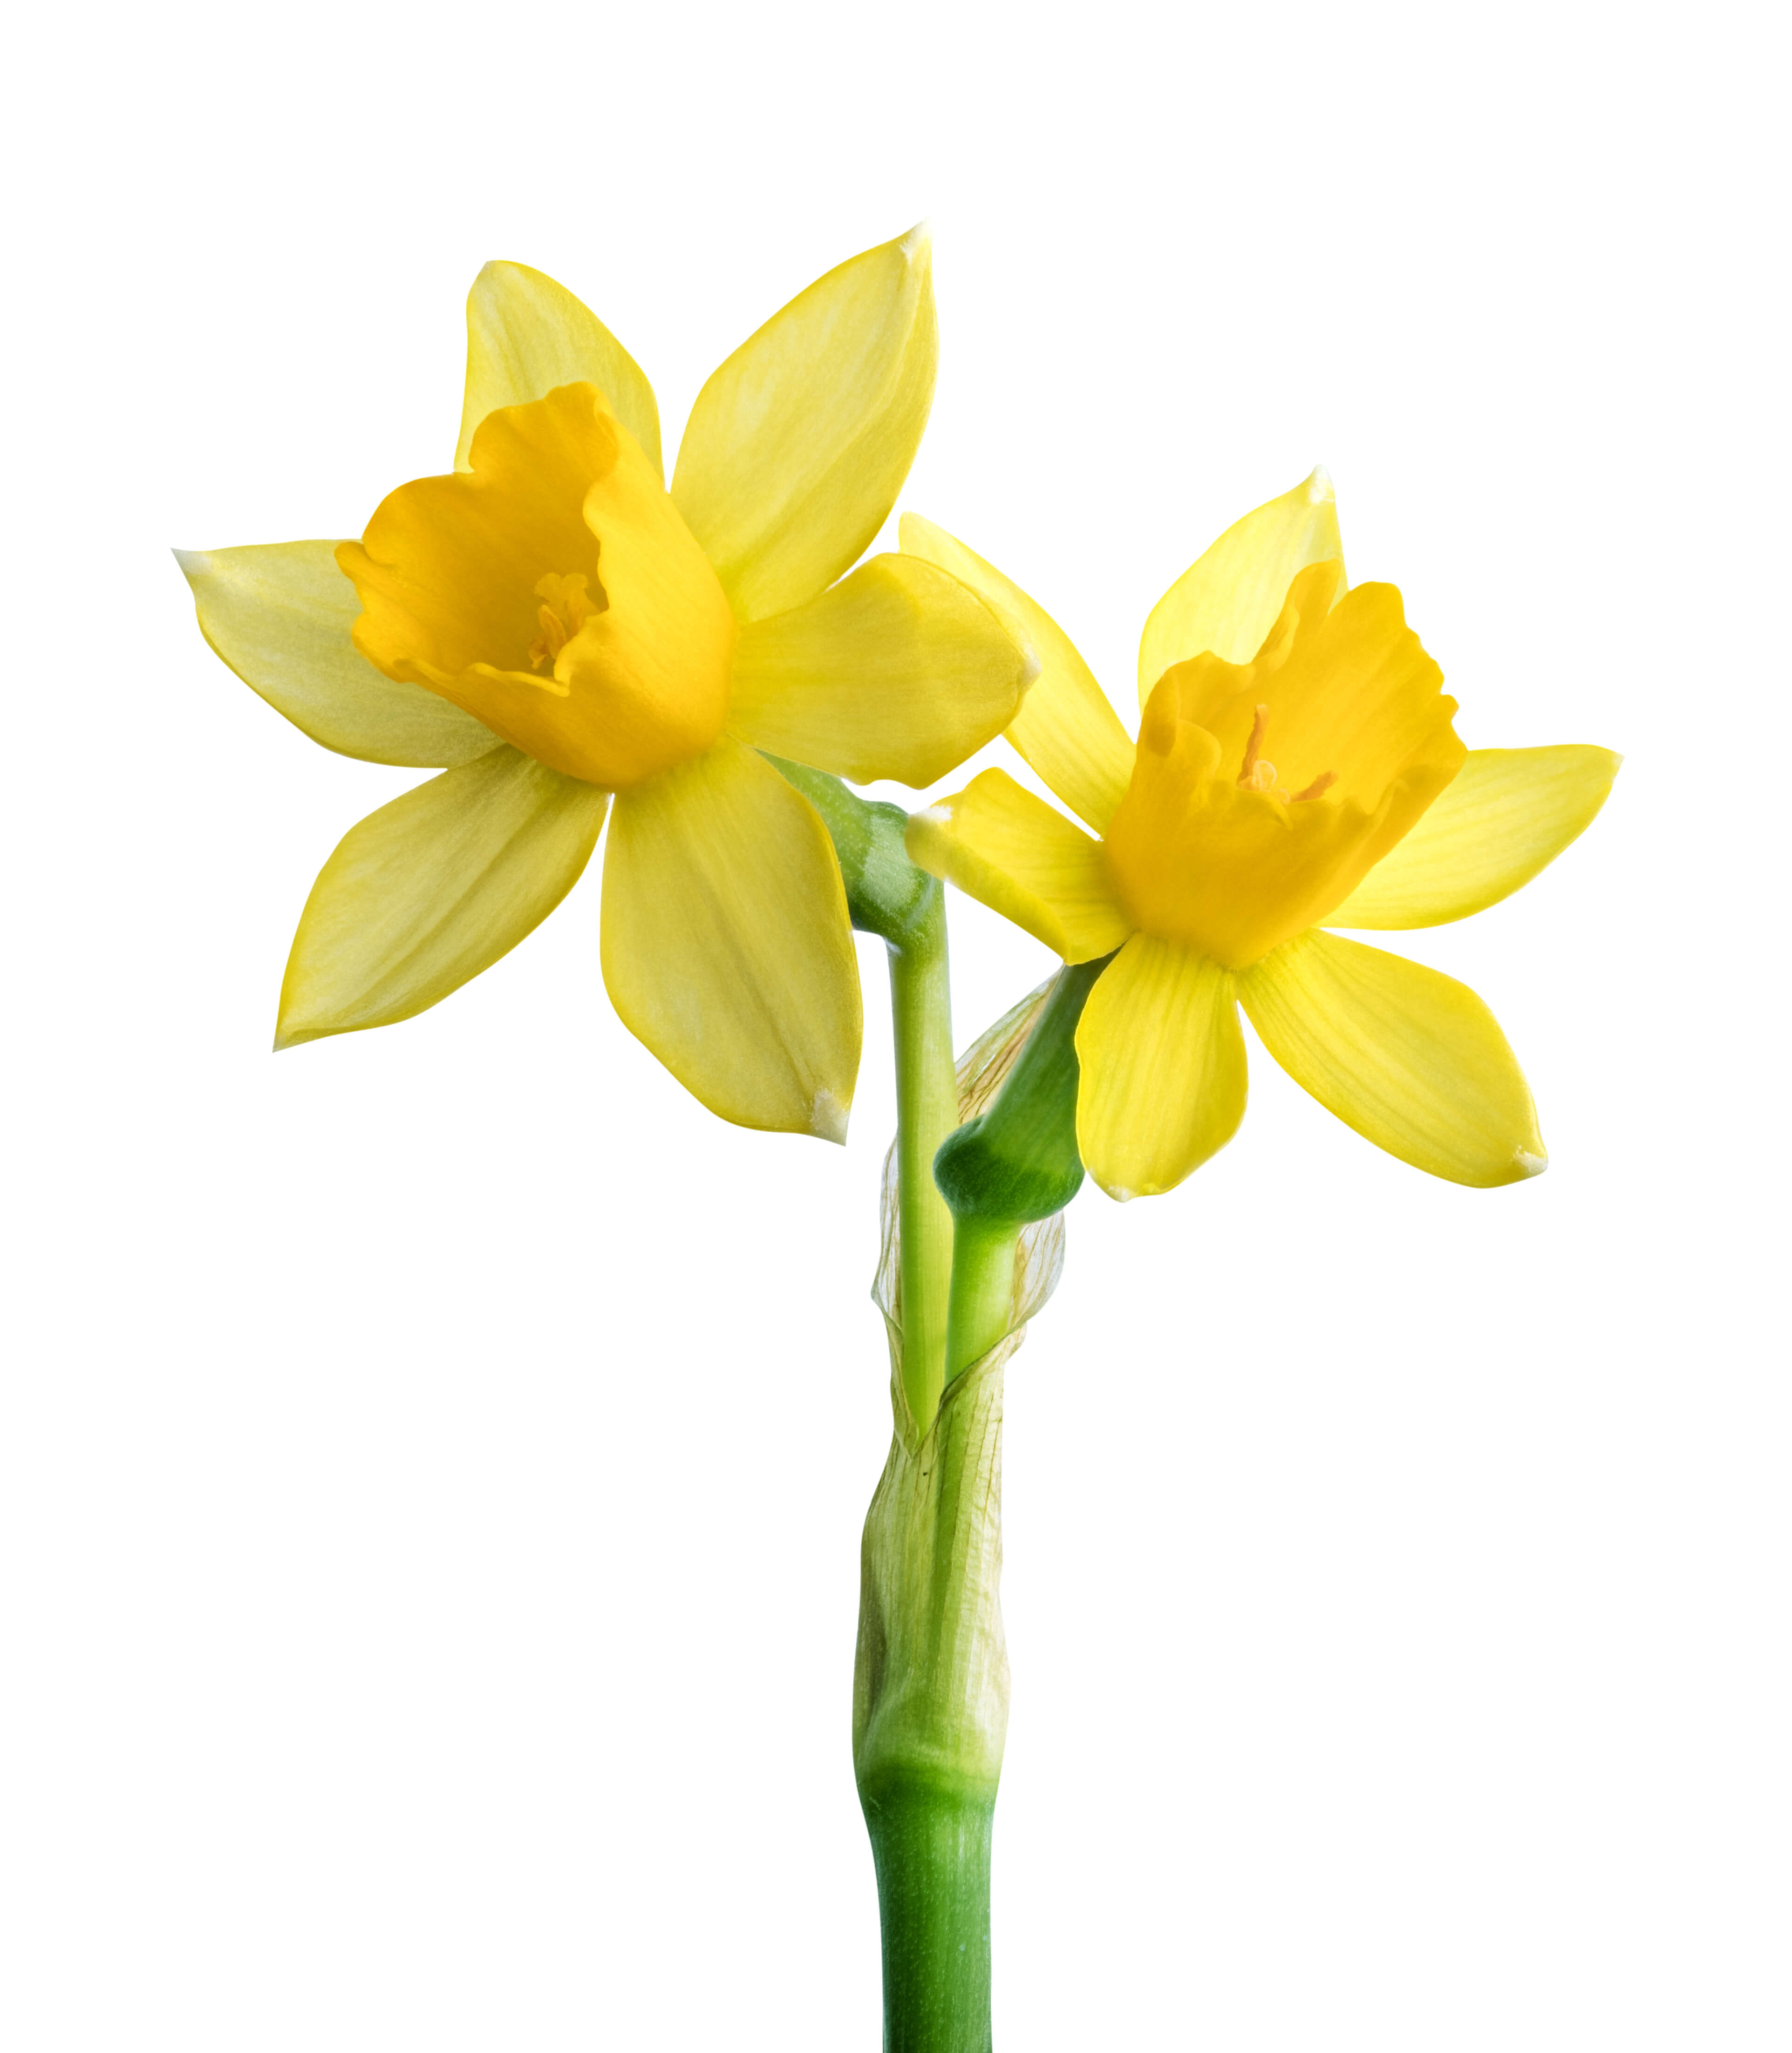 Narcissus Absolute (CAS N° 68917-12-4)